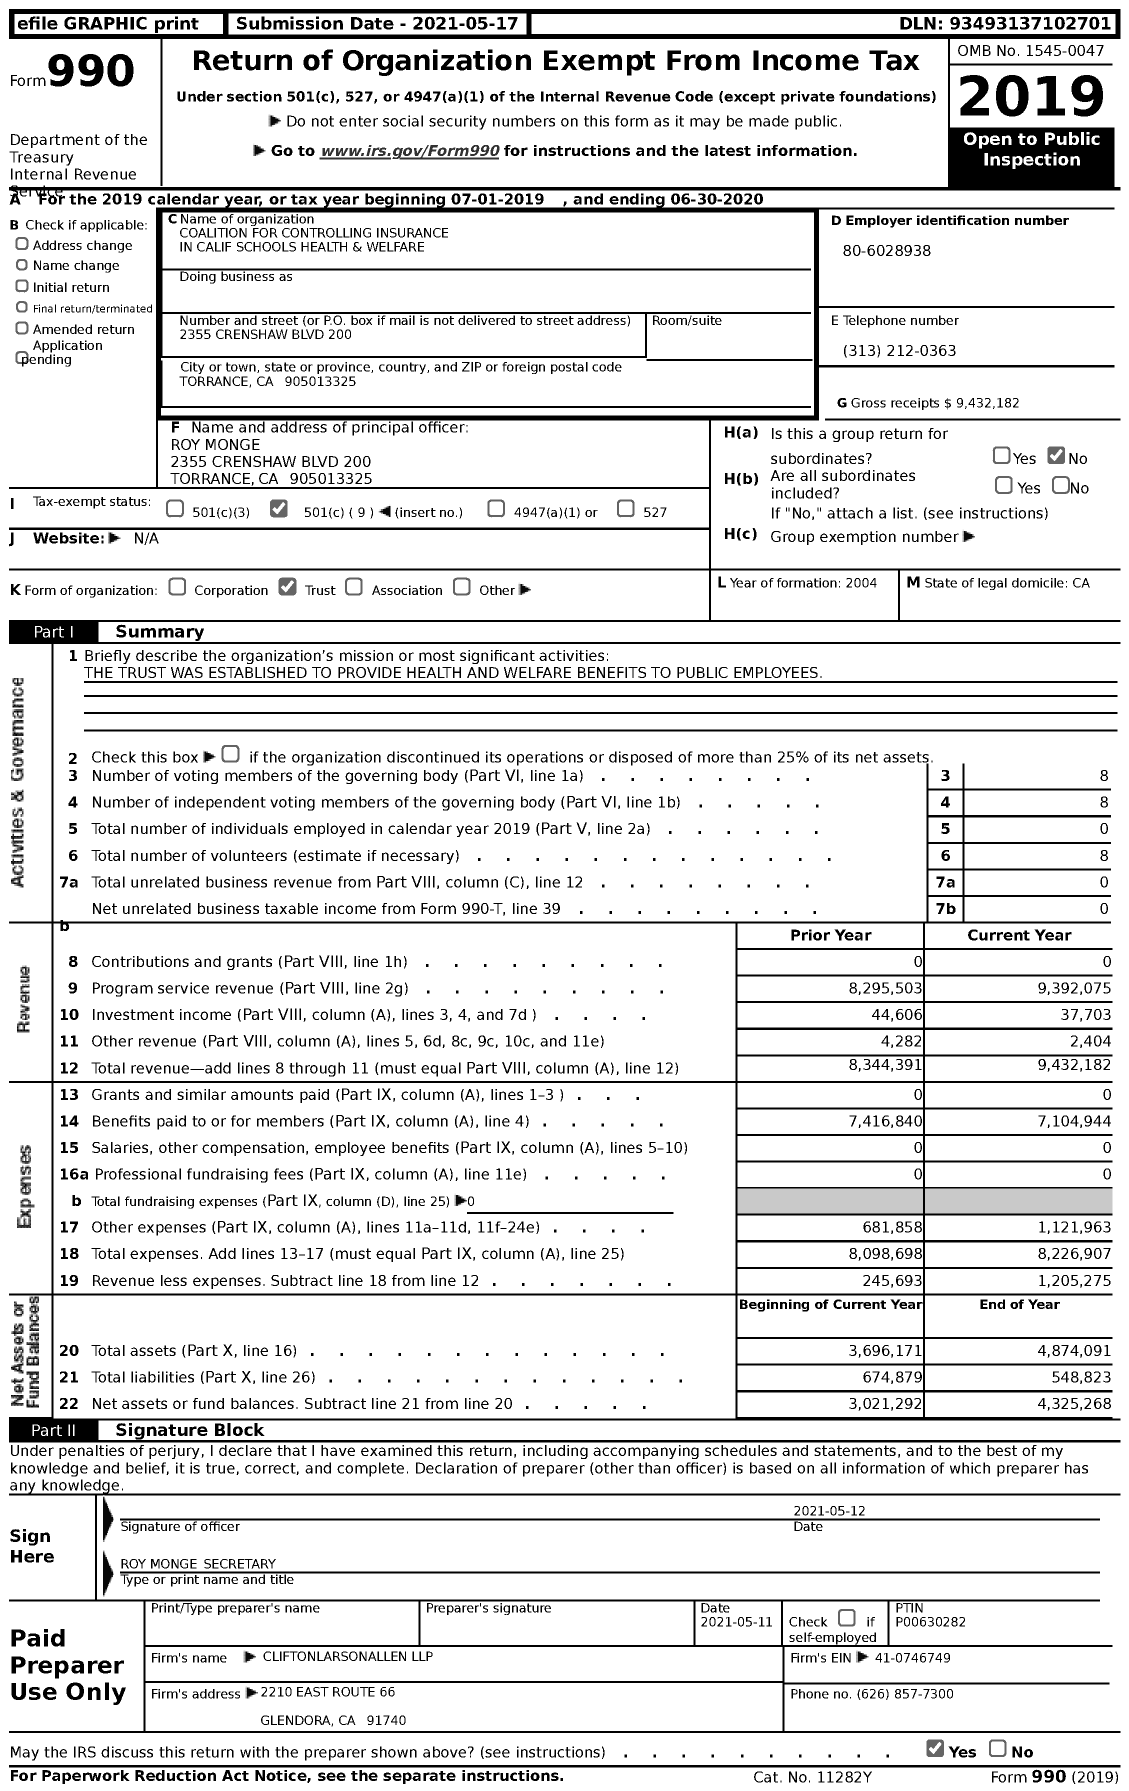 Image of first page of 2019 Form 990 for Coalition for Controlling Insurance in Calif Schools Health and Welfare